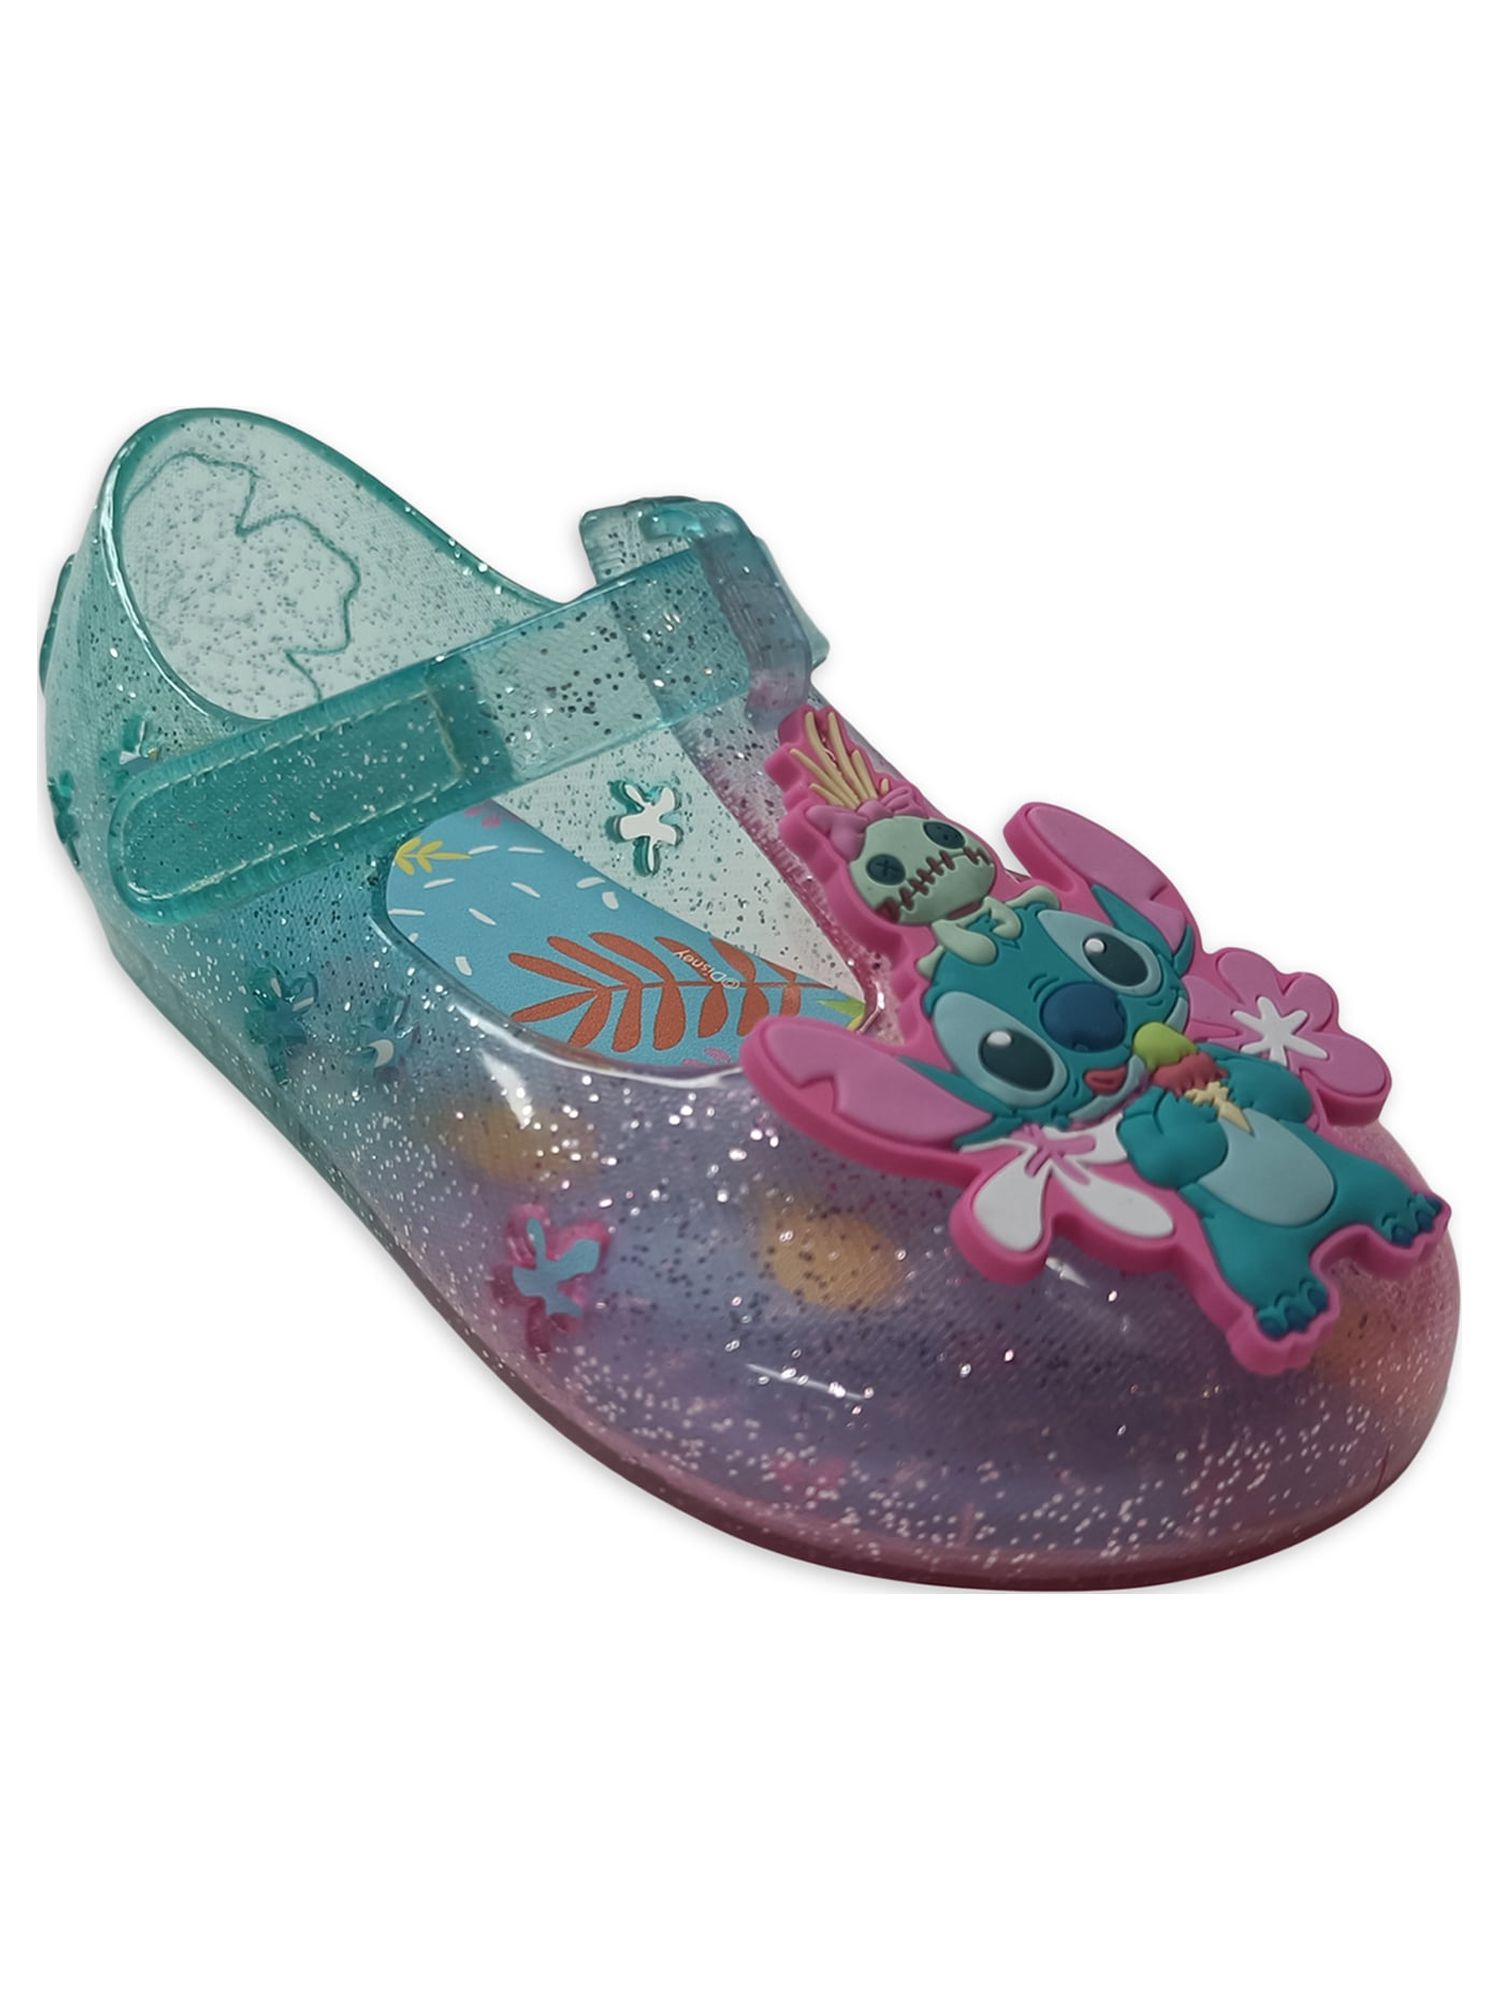 Disney Lilo & Stitch Toddler Girls Tropical Casual Jelly Shoe, Sizes 7-12 - image 1 of 6